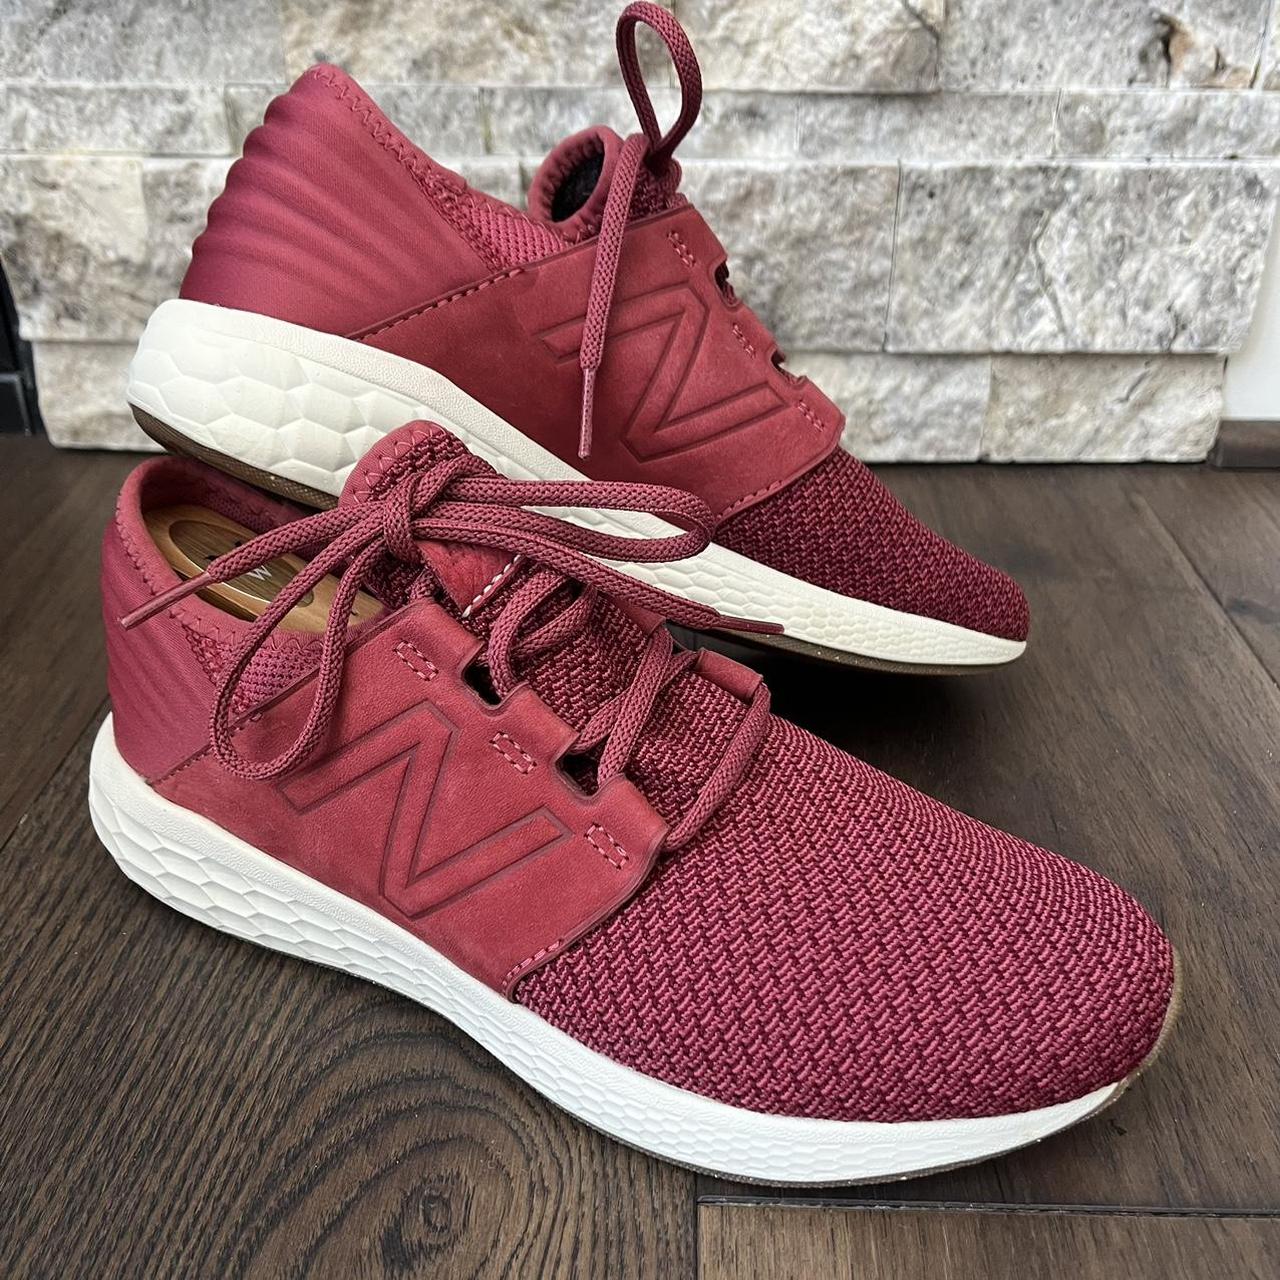 New Balance Women's Red and Burgundy Trainers